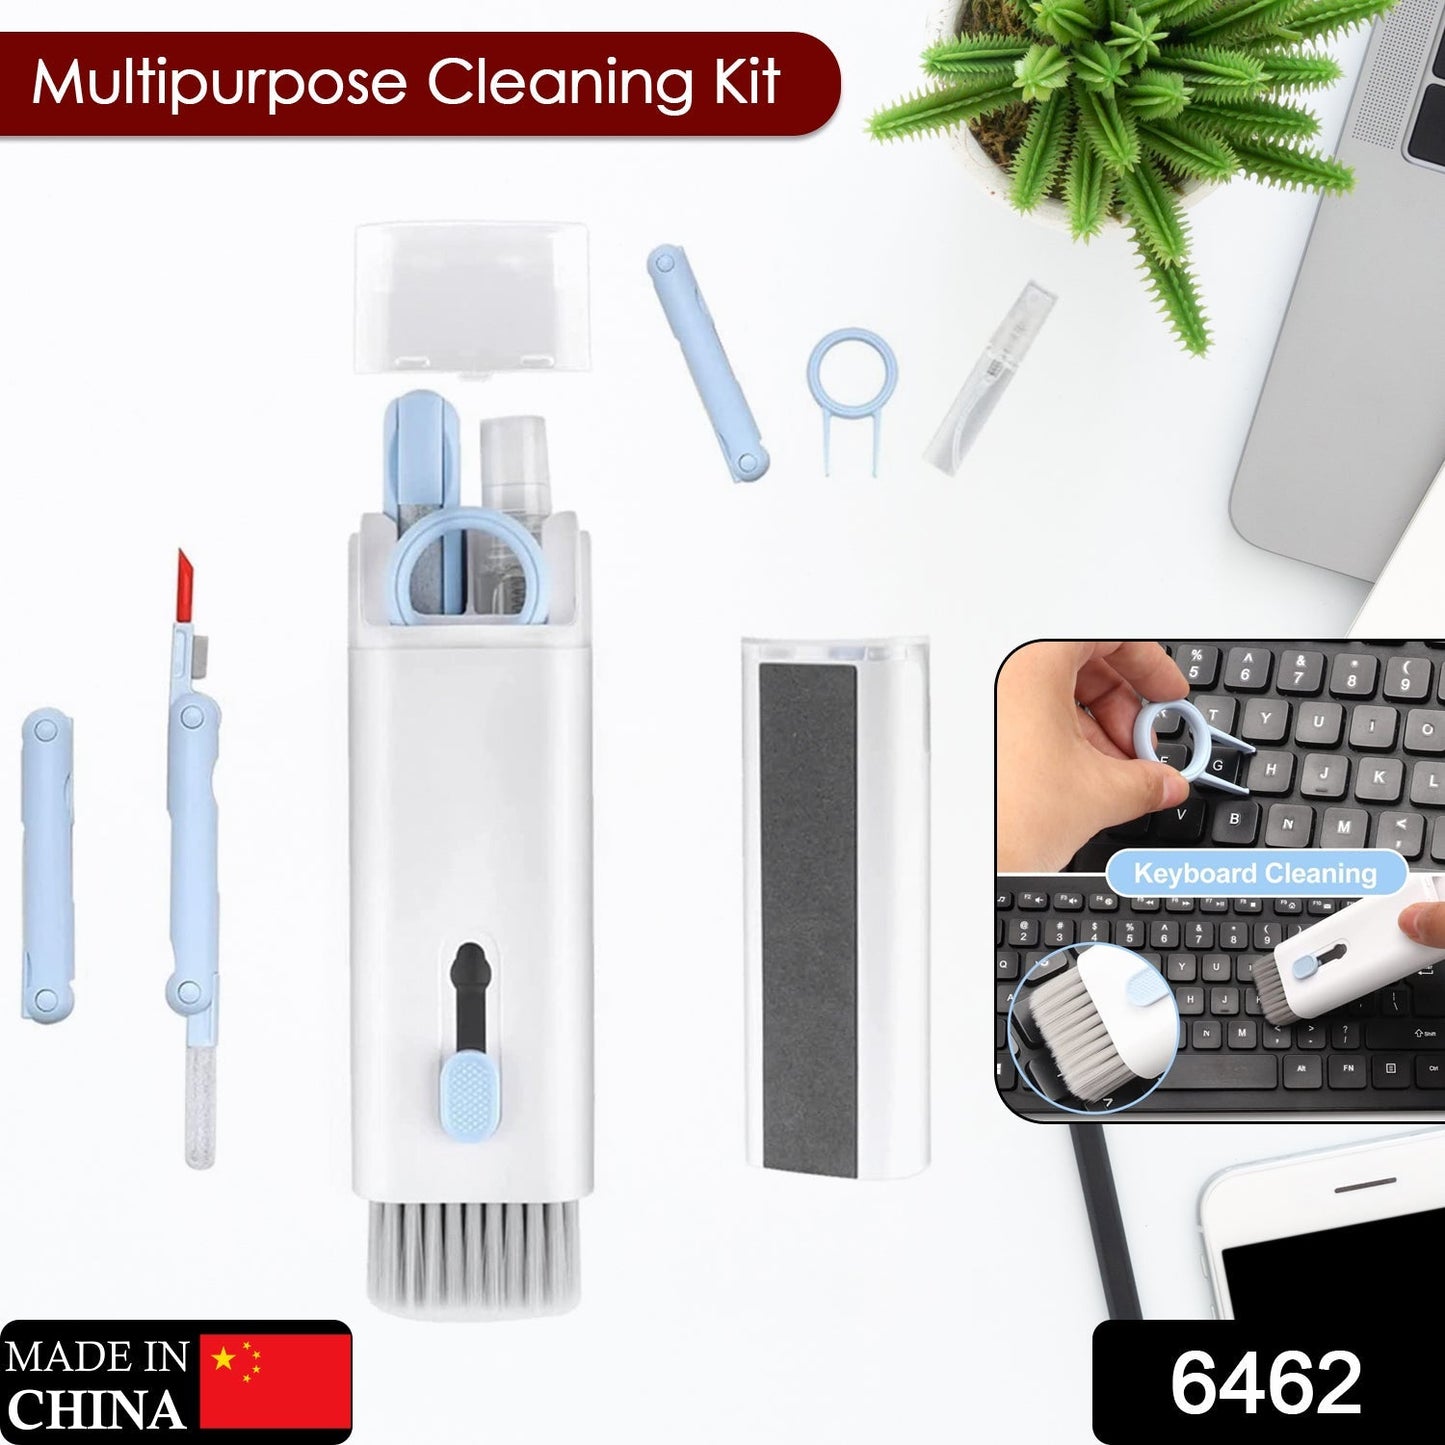 6462 7 in 1 Electronic Cleaner kit, Cleaning Kit for Monitor Keyboard Airpods, Screen Dust Brush Including Soft Sweep, Swipe, Airpod Cleaner Pen, Key Puller and Spray Bottle   02